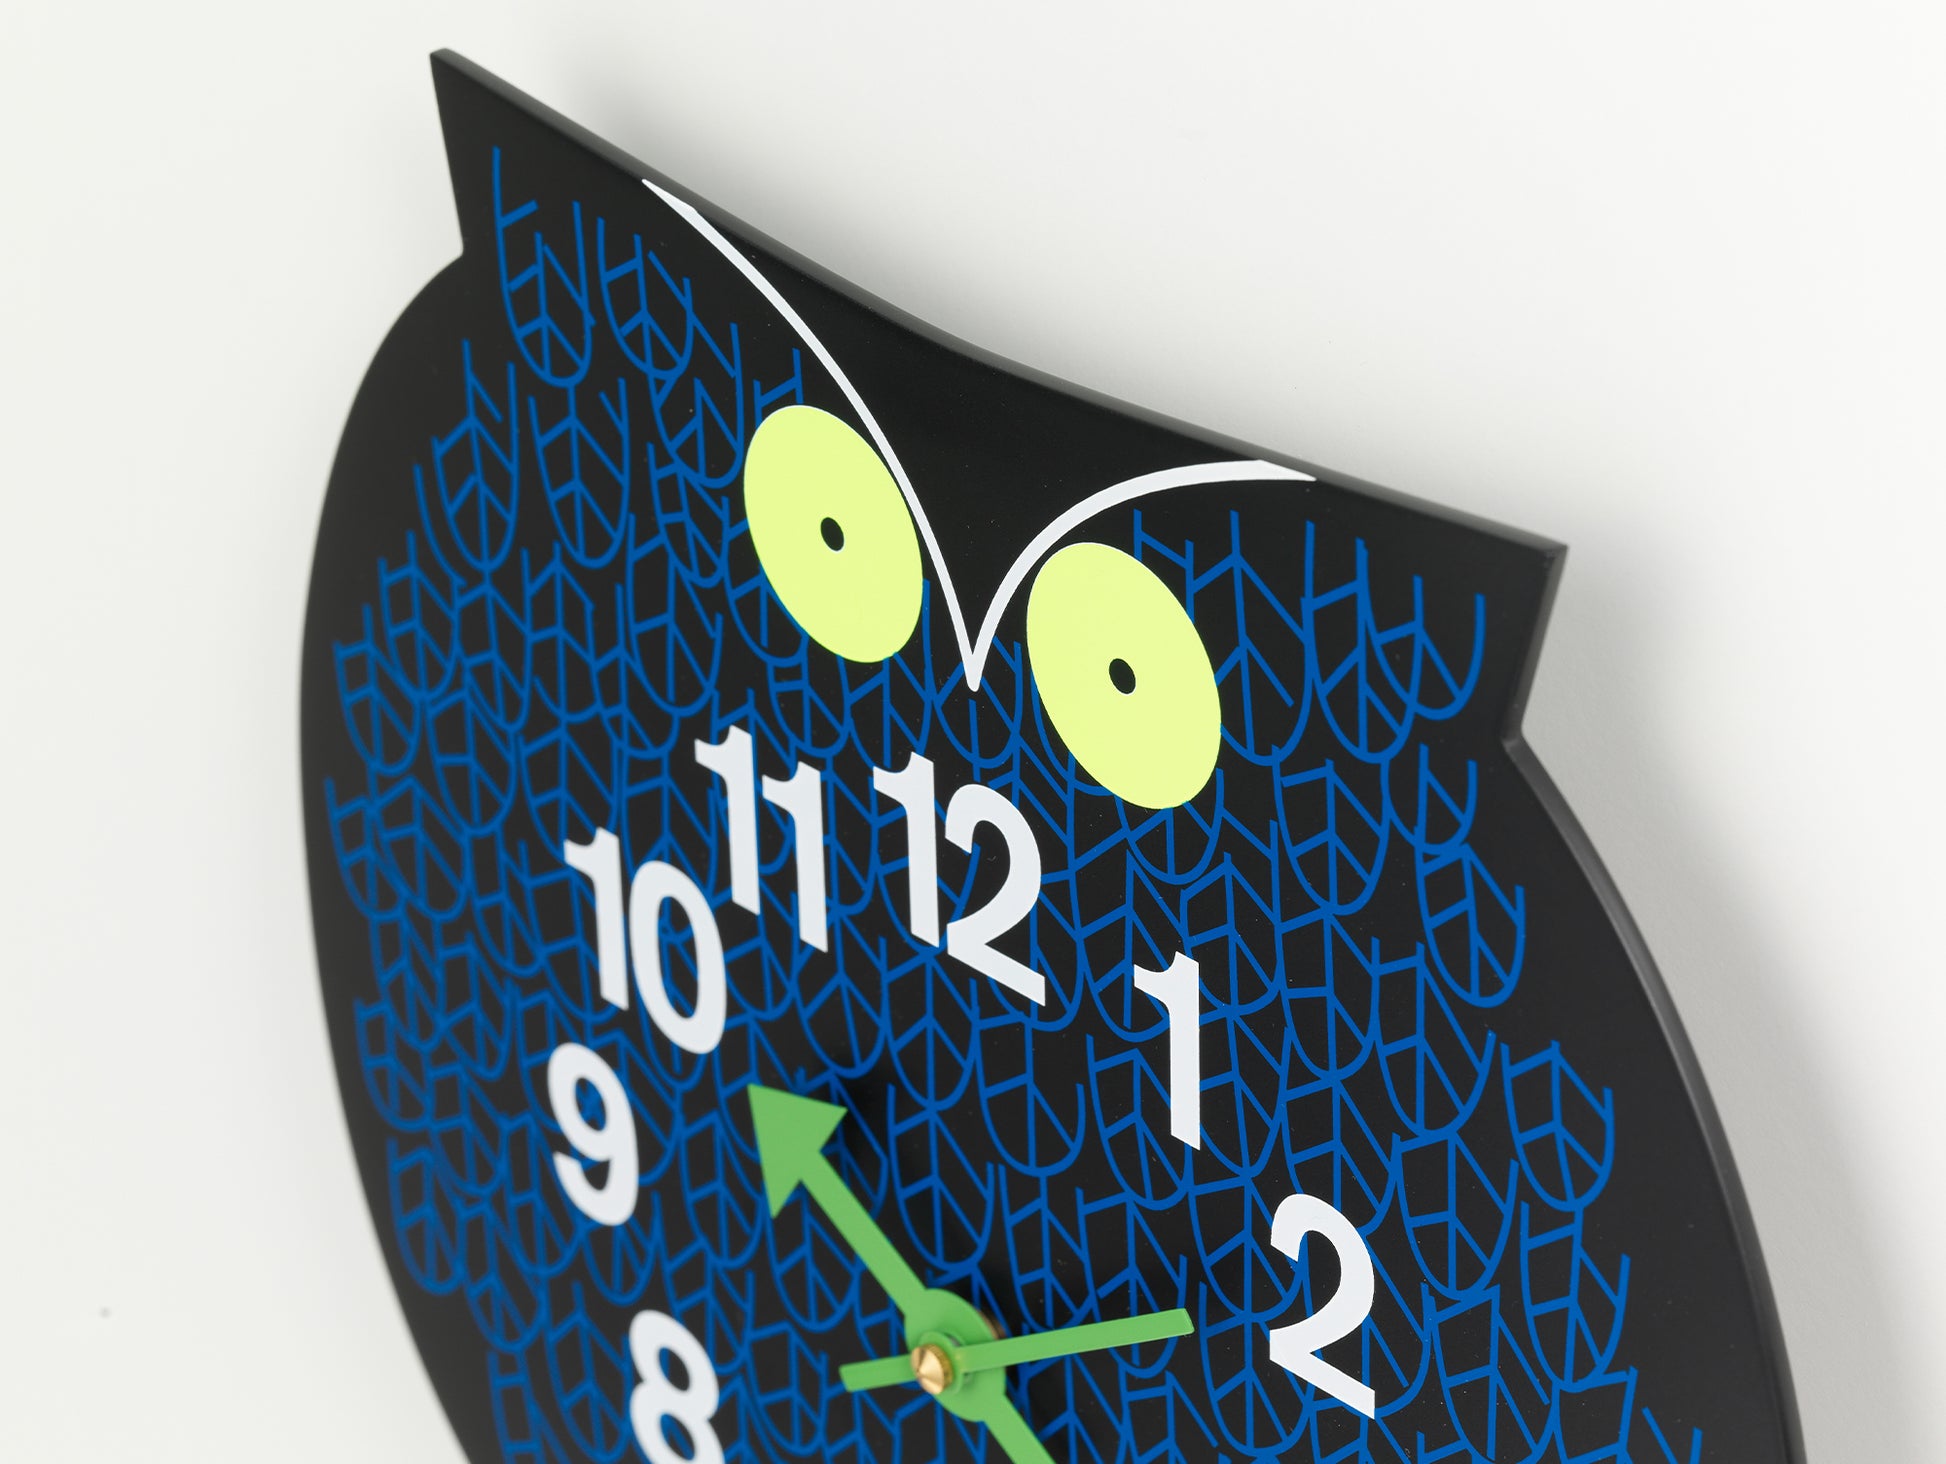 George Nelson Zoo Timers by Vitra - Omar the Owl